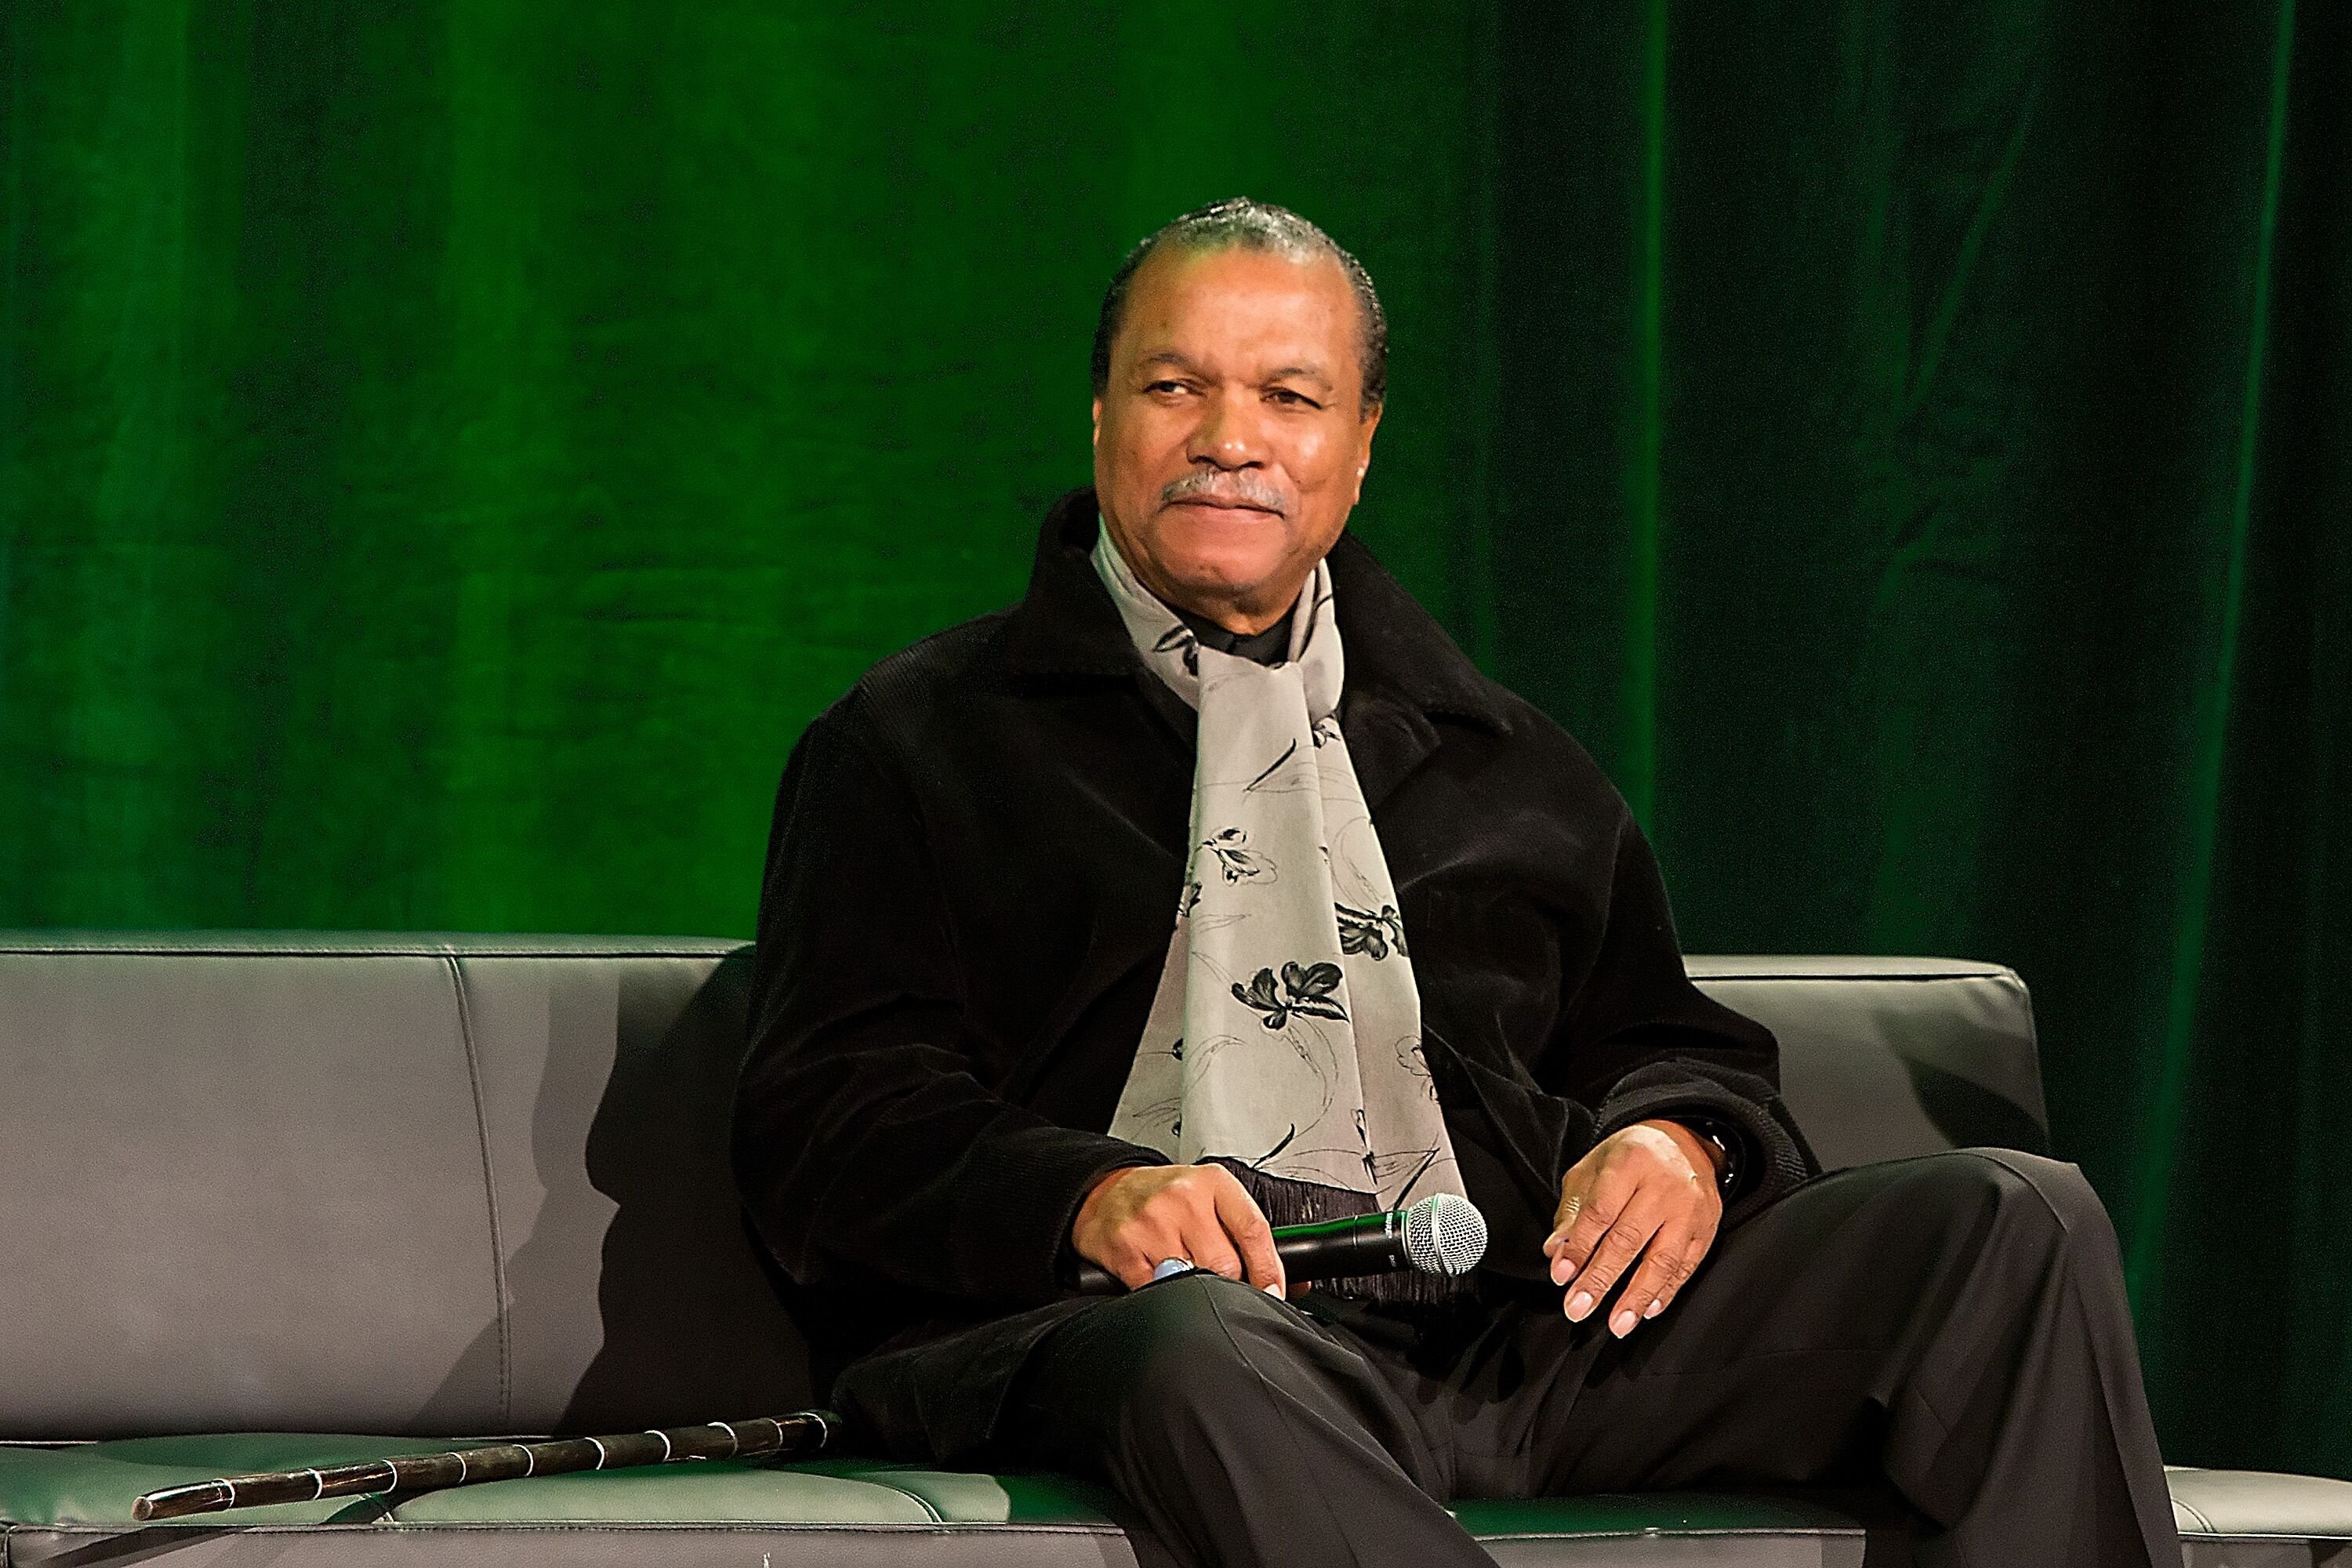 Billy Dee Williams attends a speaking engagement for “Star Wars” | Source: Getty Images/GlobalImagesUkraine